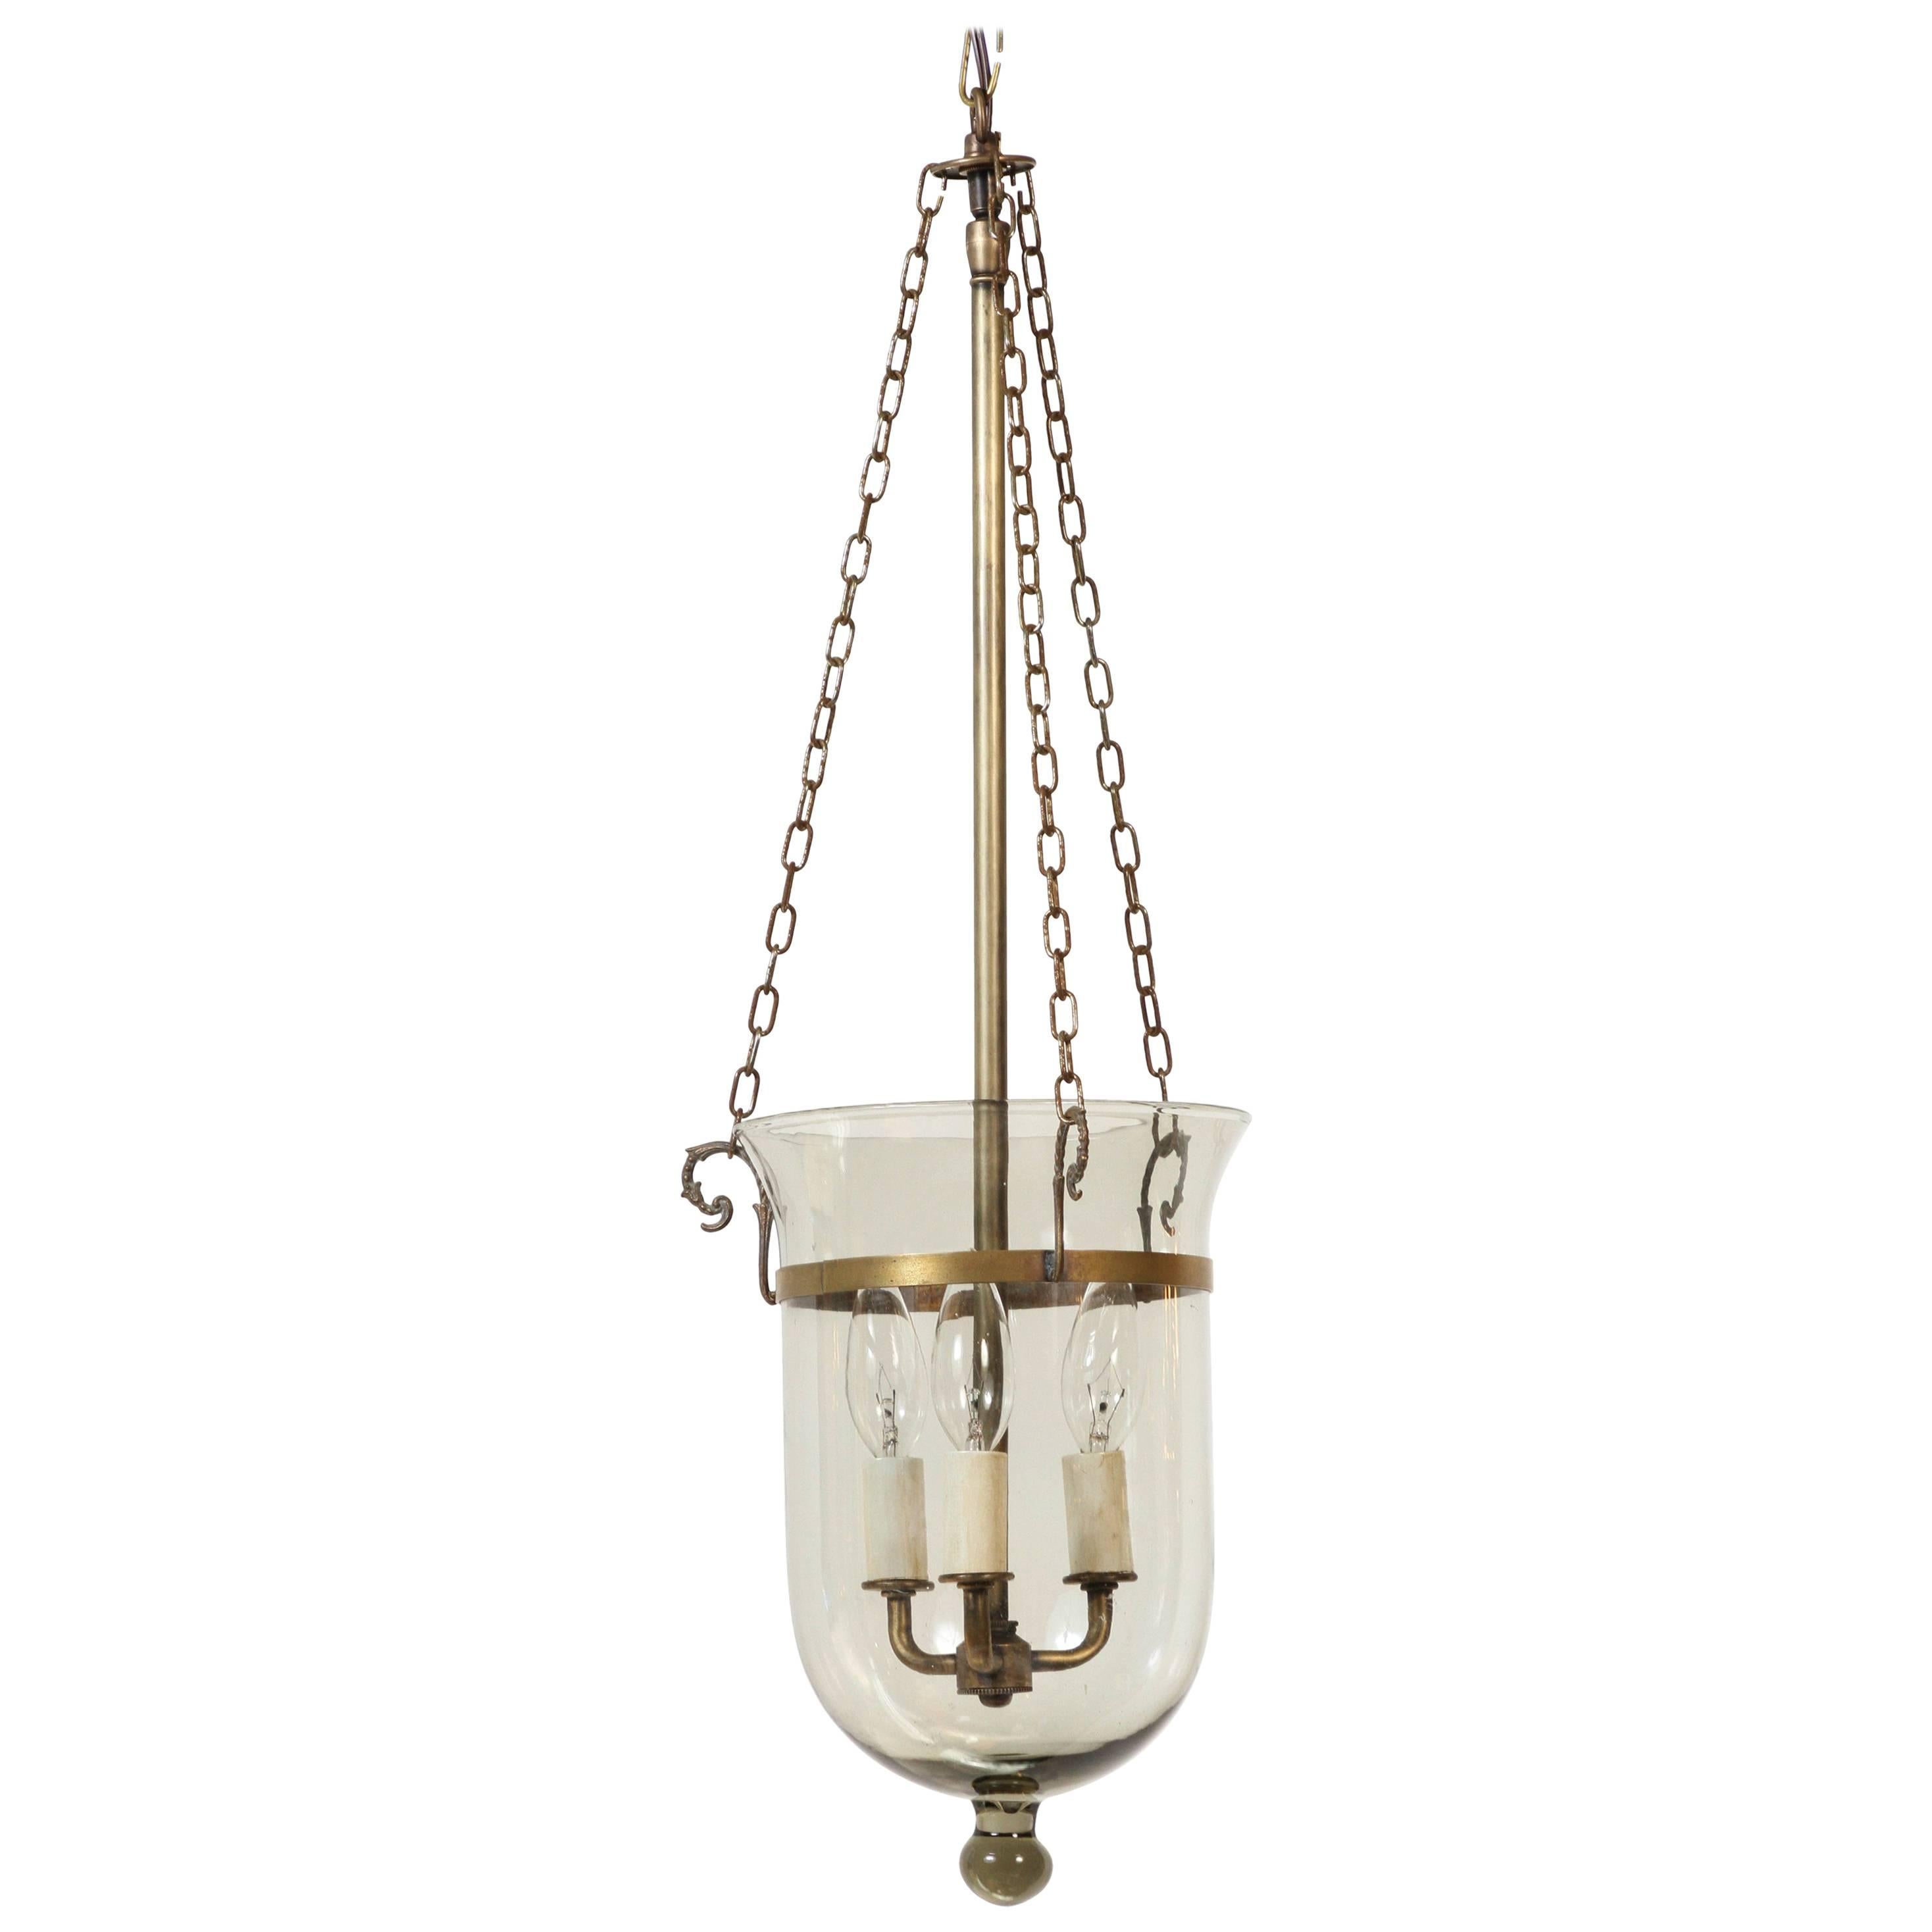 Vintage Smoke Glass Bell Jar Hanging Light with Decorative Chain, Newly Rewired